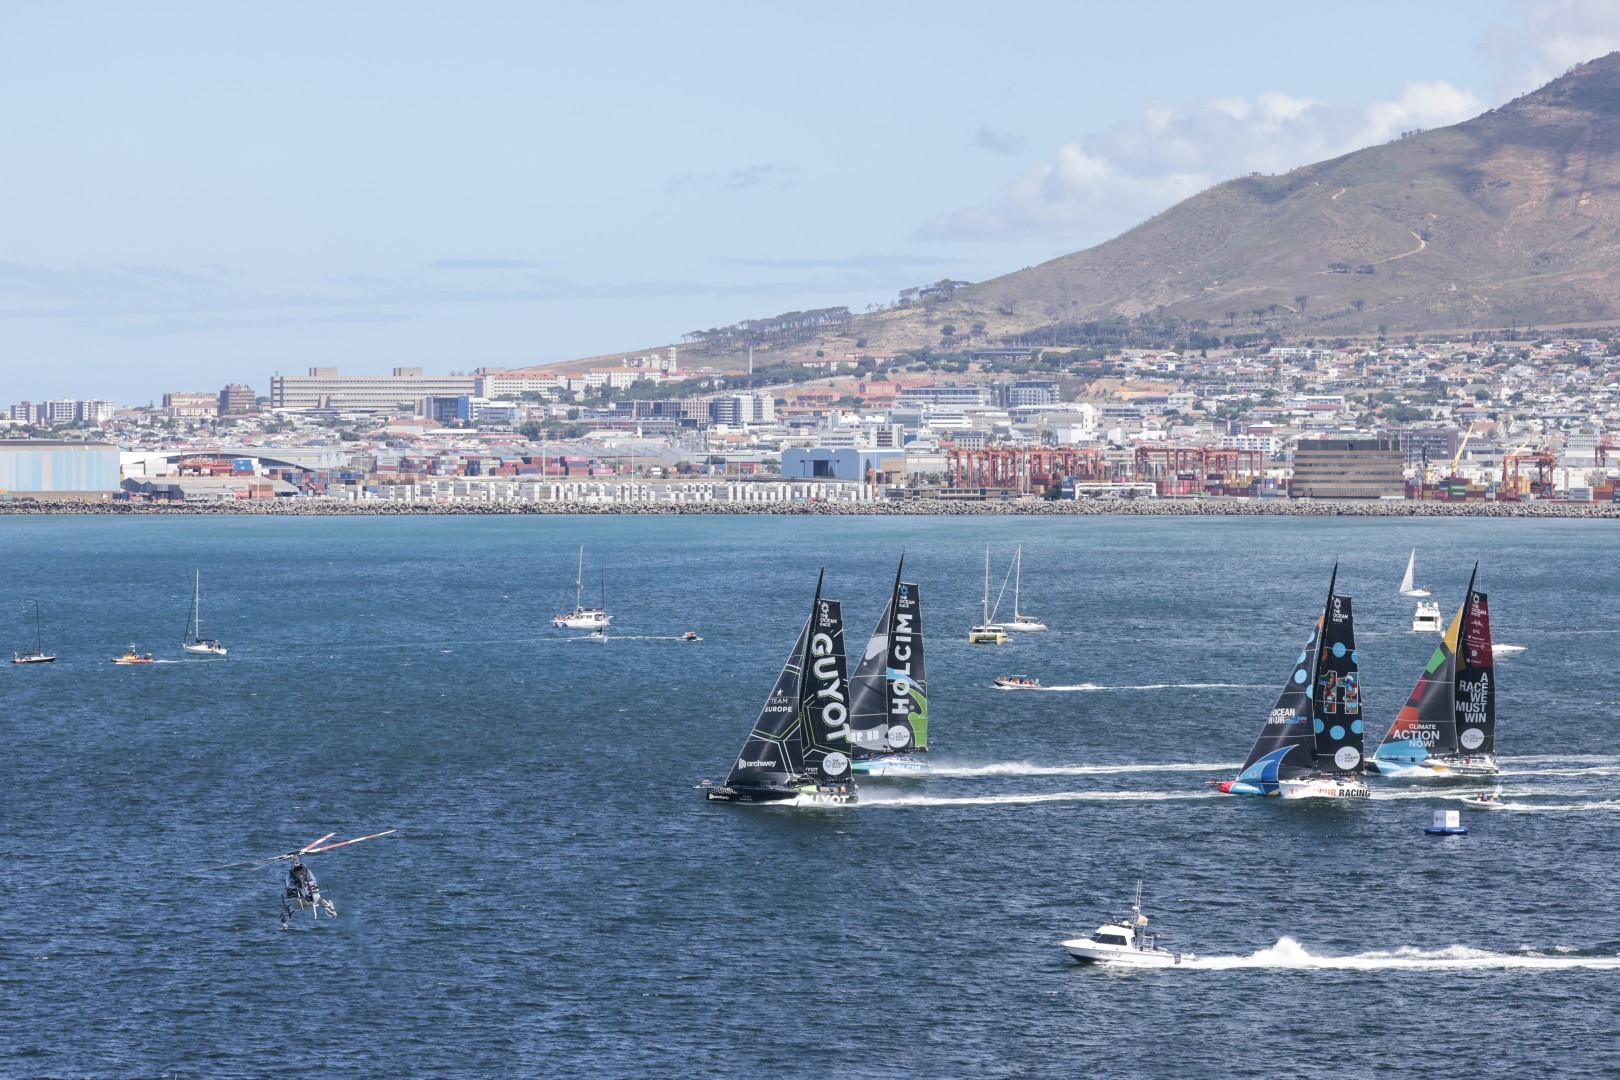 In-Port race in Cape Town.
© Sailing Energy / The Ocean Race